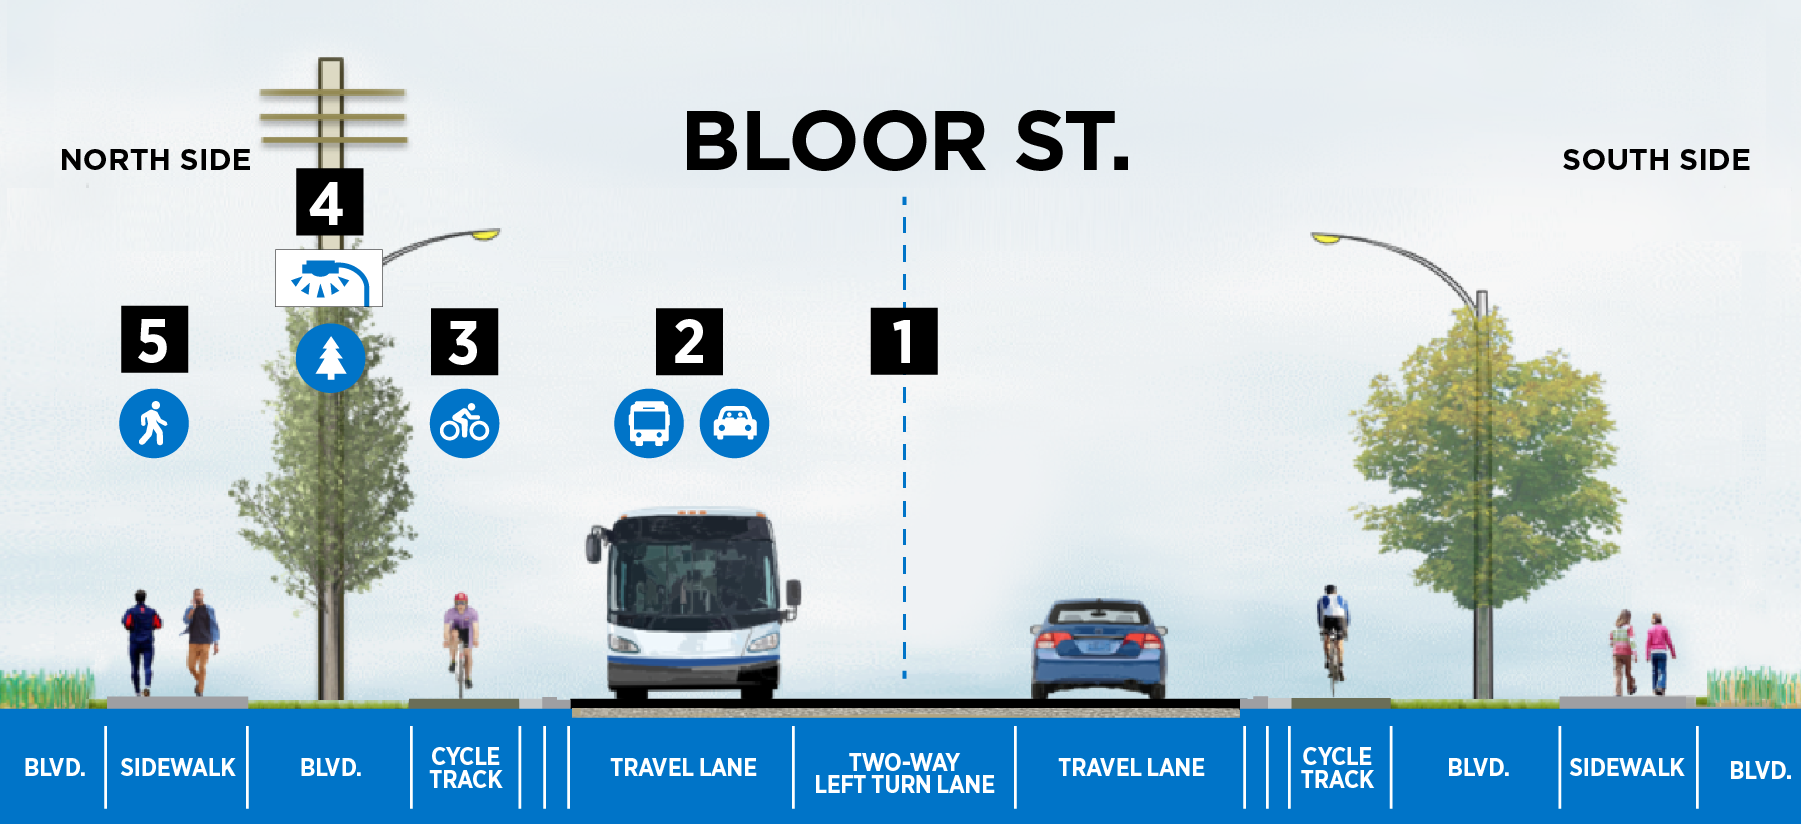 Artist rendering of a cross section of Bloor Street from North to South (left to right) with the boulevard, sidewalk, boulevard, cycle track, travel lane, two-way left turn lane, travel lane, cycle track, boulevard, sidewalk and finally, the boulevard again. There are numbers corresponding with five features explained in the copy.